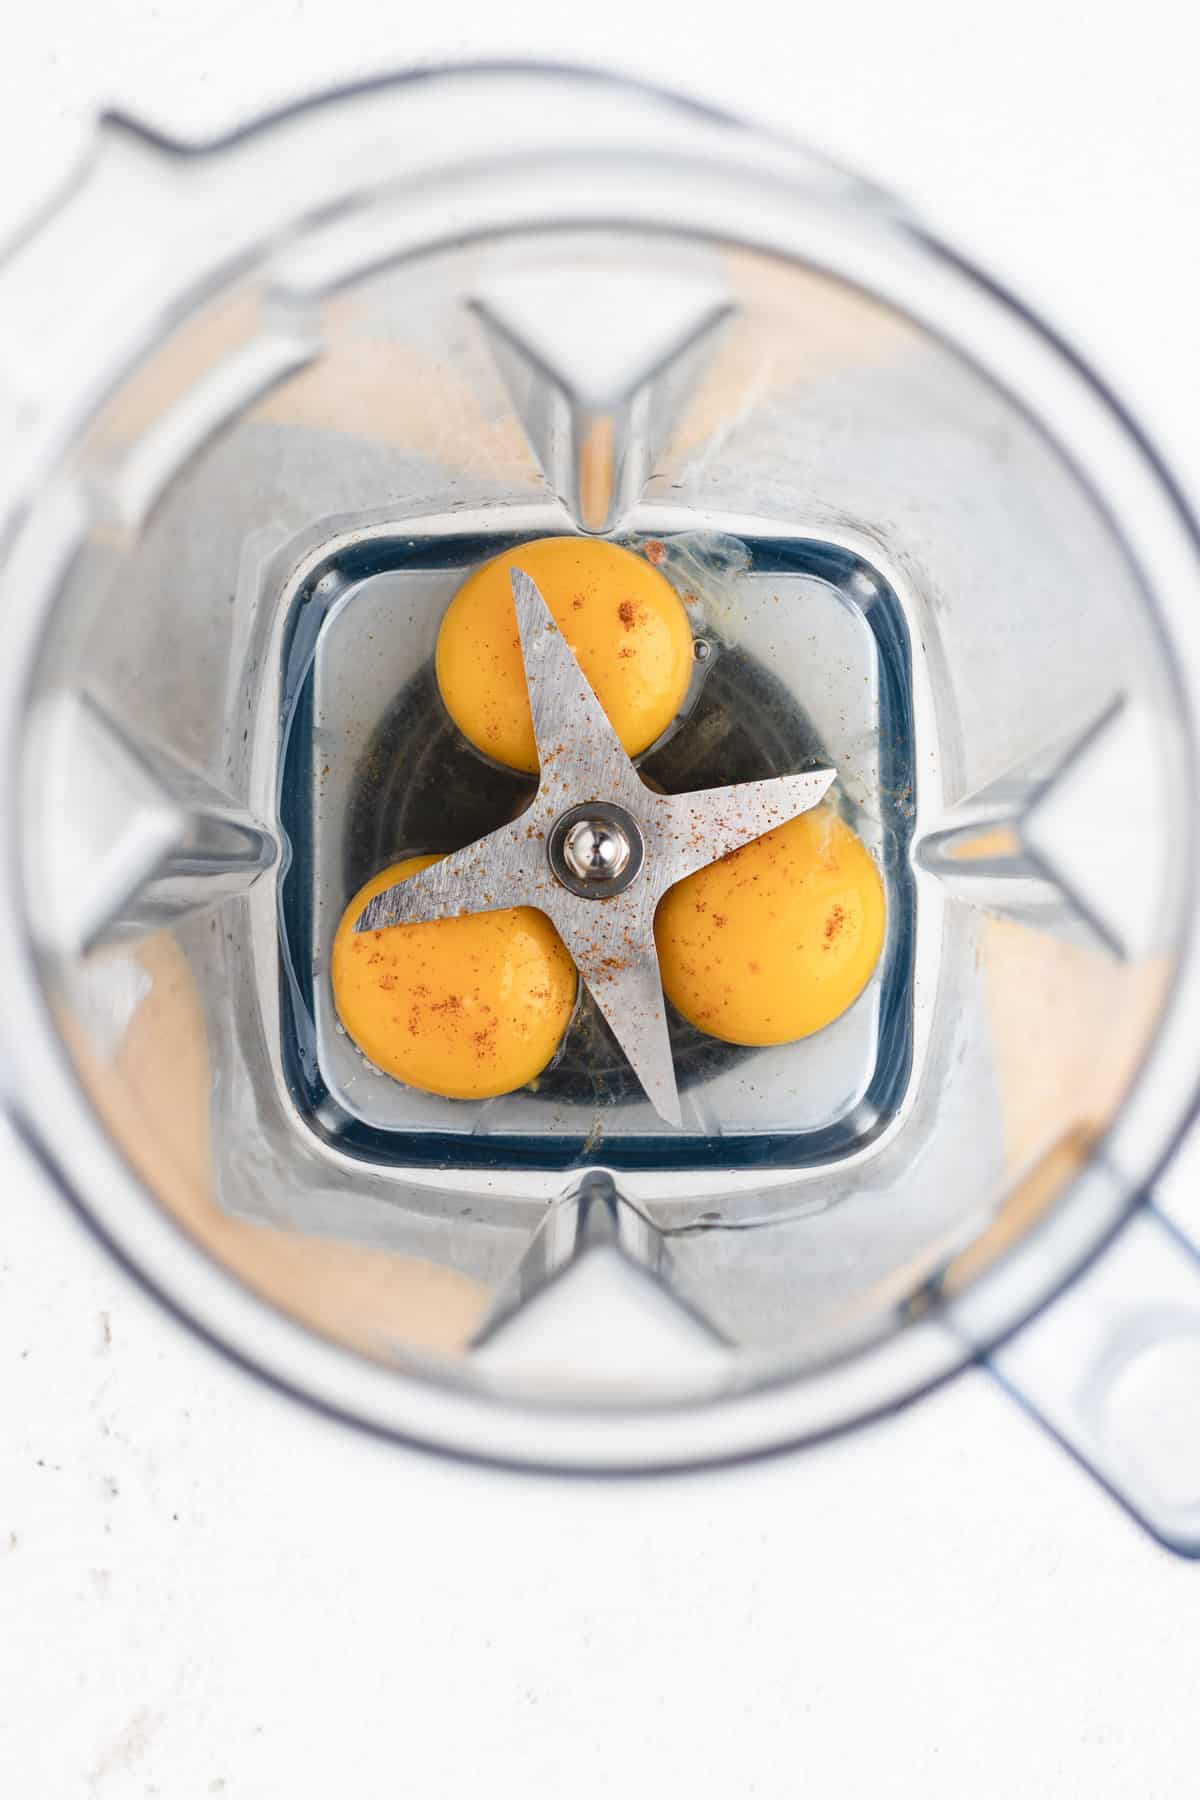 Image of a blender filled with a mixture of vibrant yellow egg yolks, tangy lemon juice, and a sprinkle of spicy cayenne pepper.